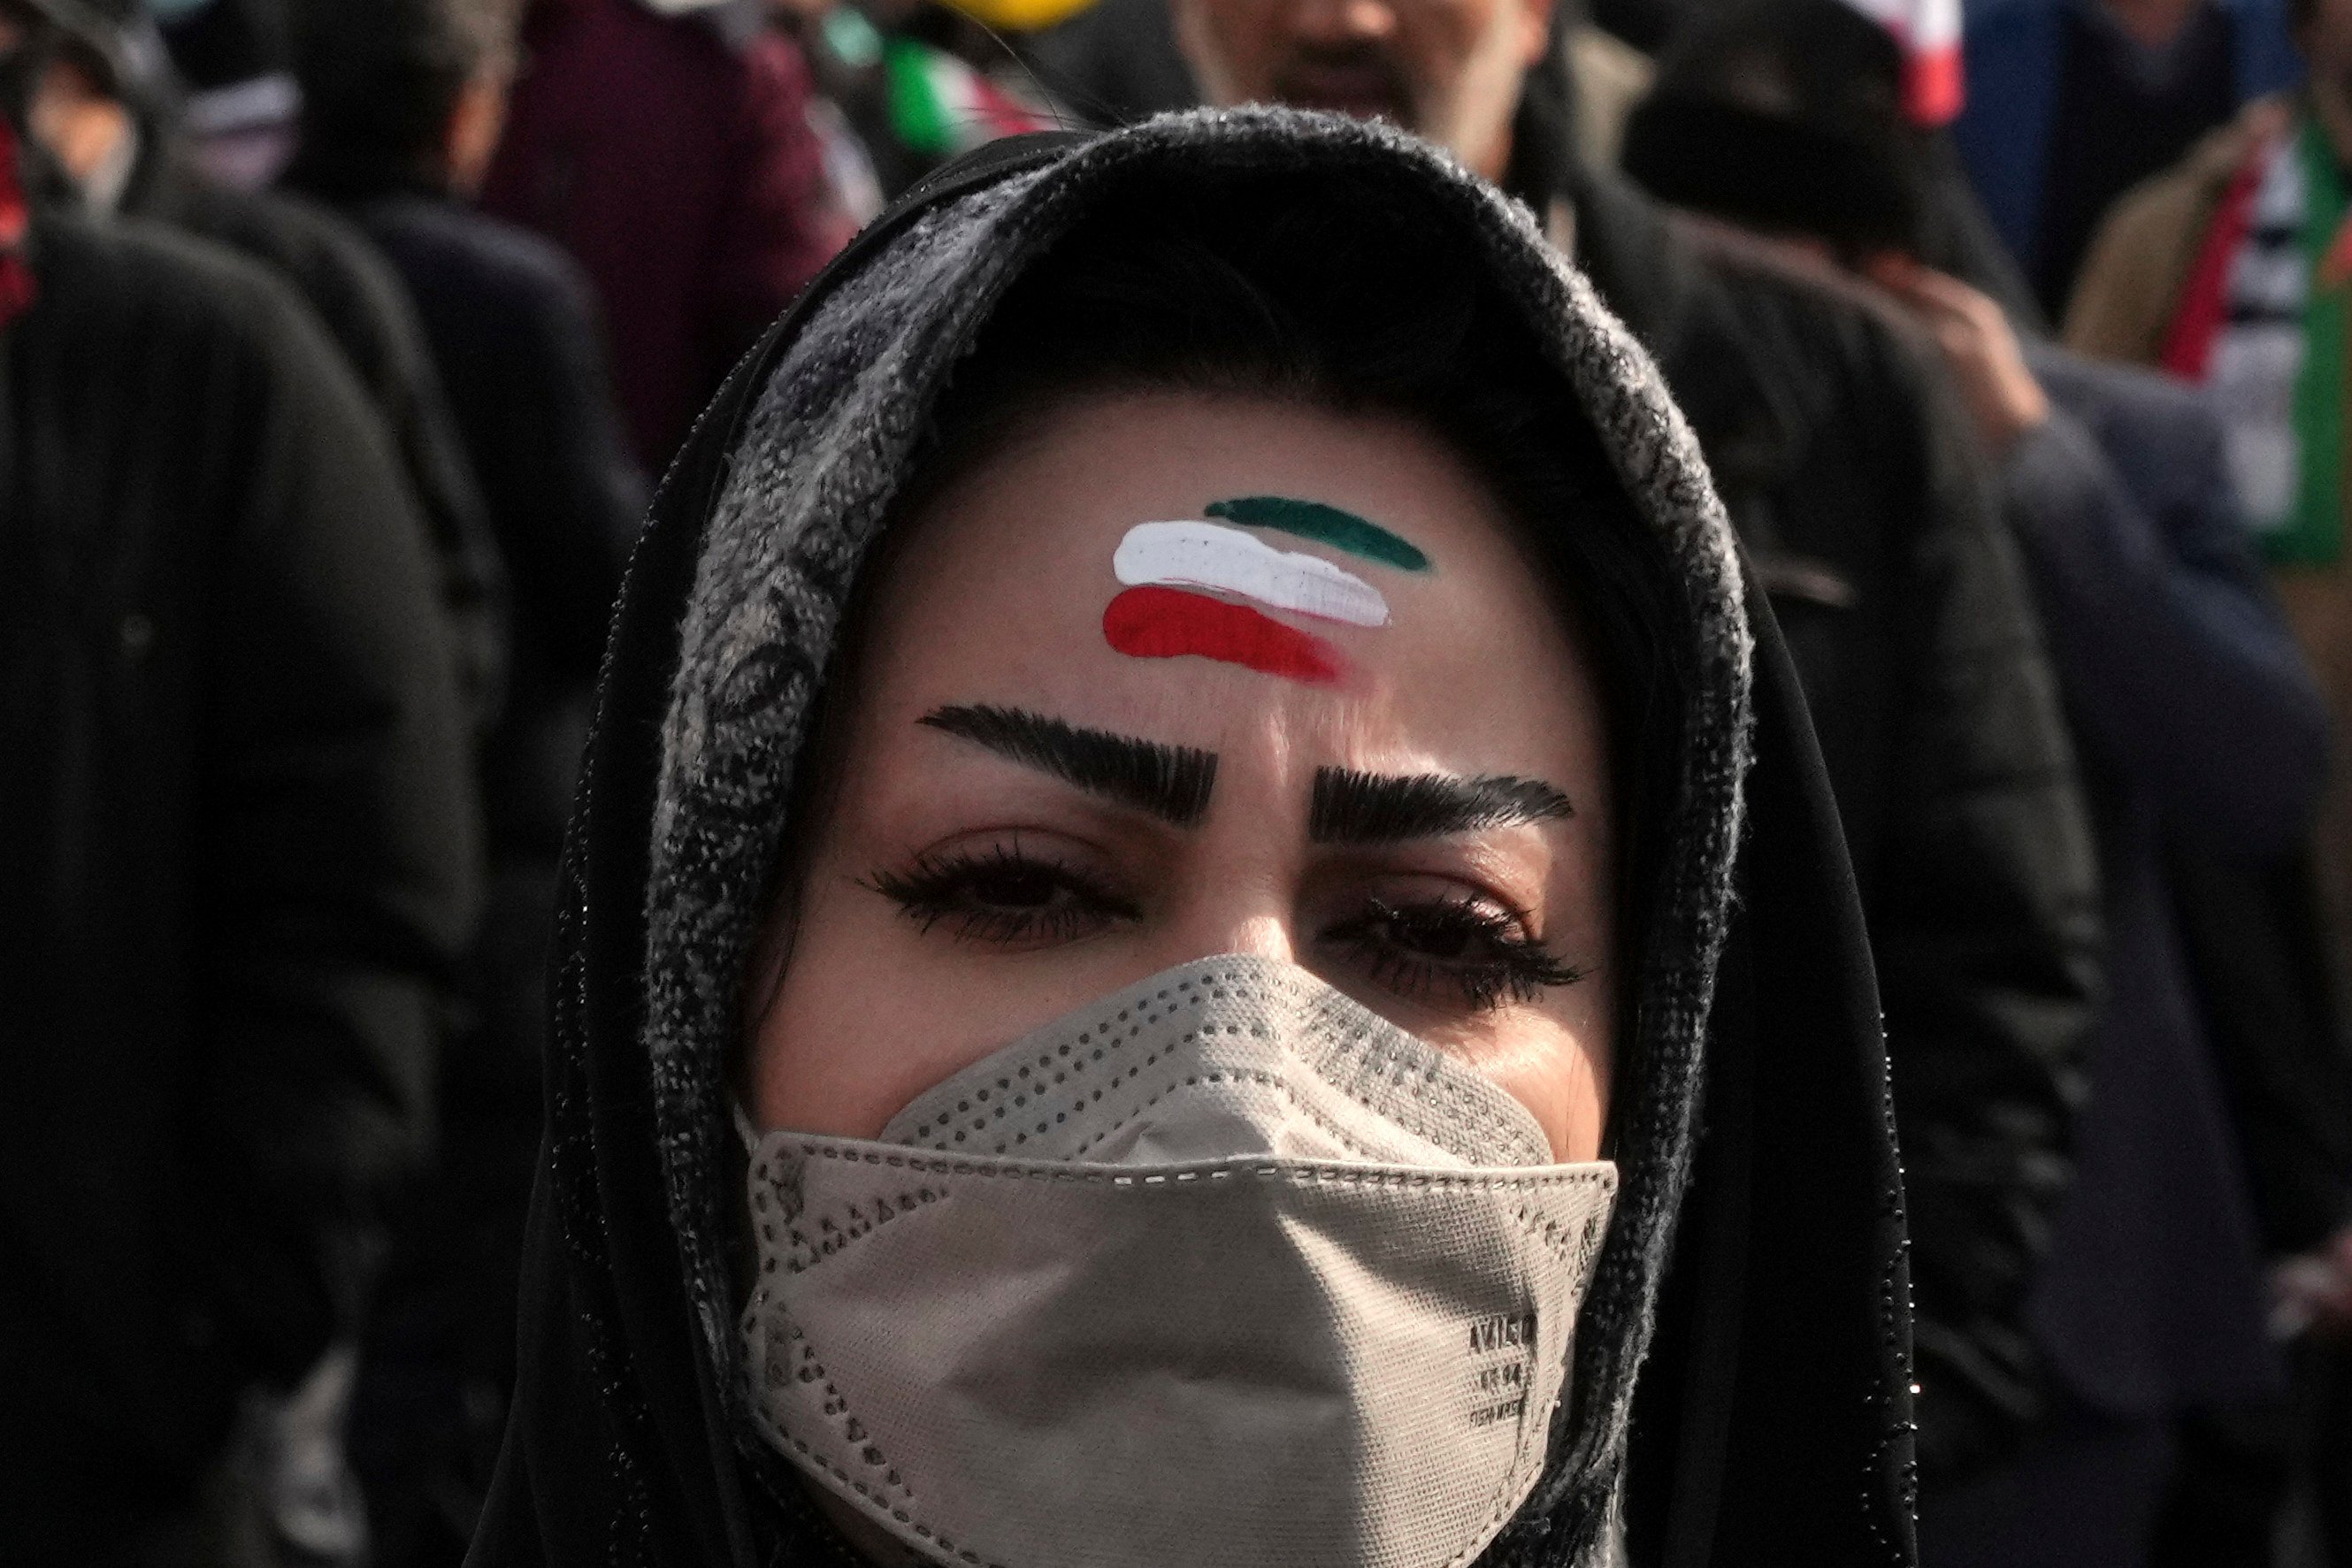 A woman with forehead painted with the Iranian flag’s colors takes part in the annual rally commemorating Iran’s 1979 Islamic Revolution, in Tehran, Iran. Photo: AP